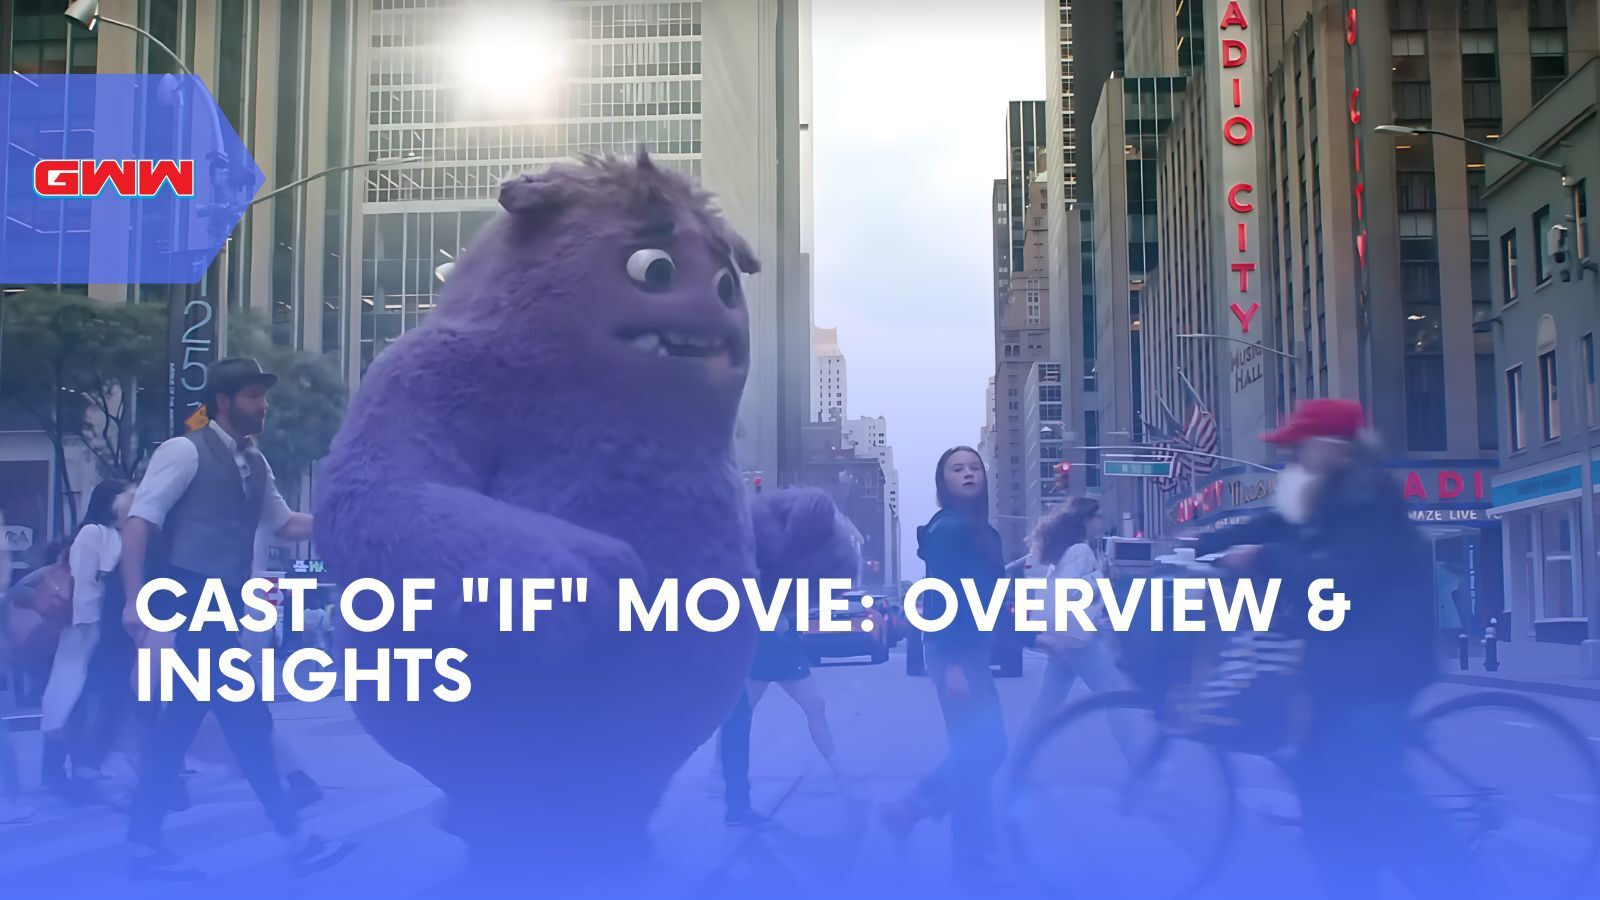 Cast of "IF" Movie: Overview & Insights